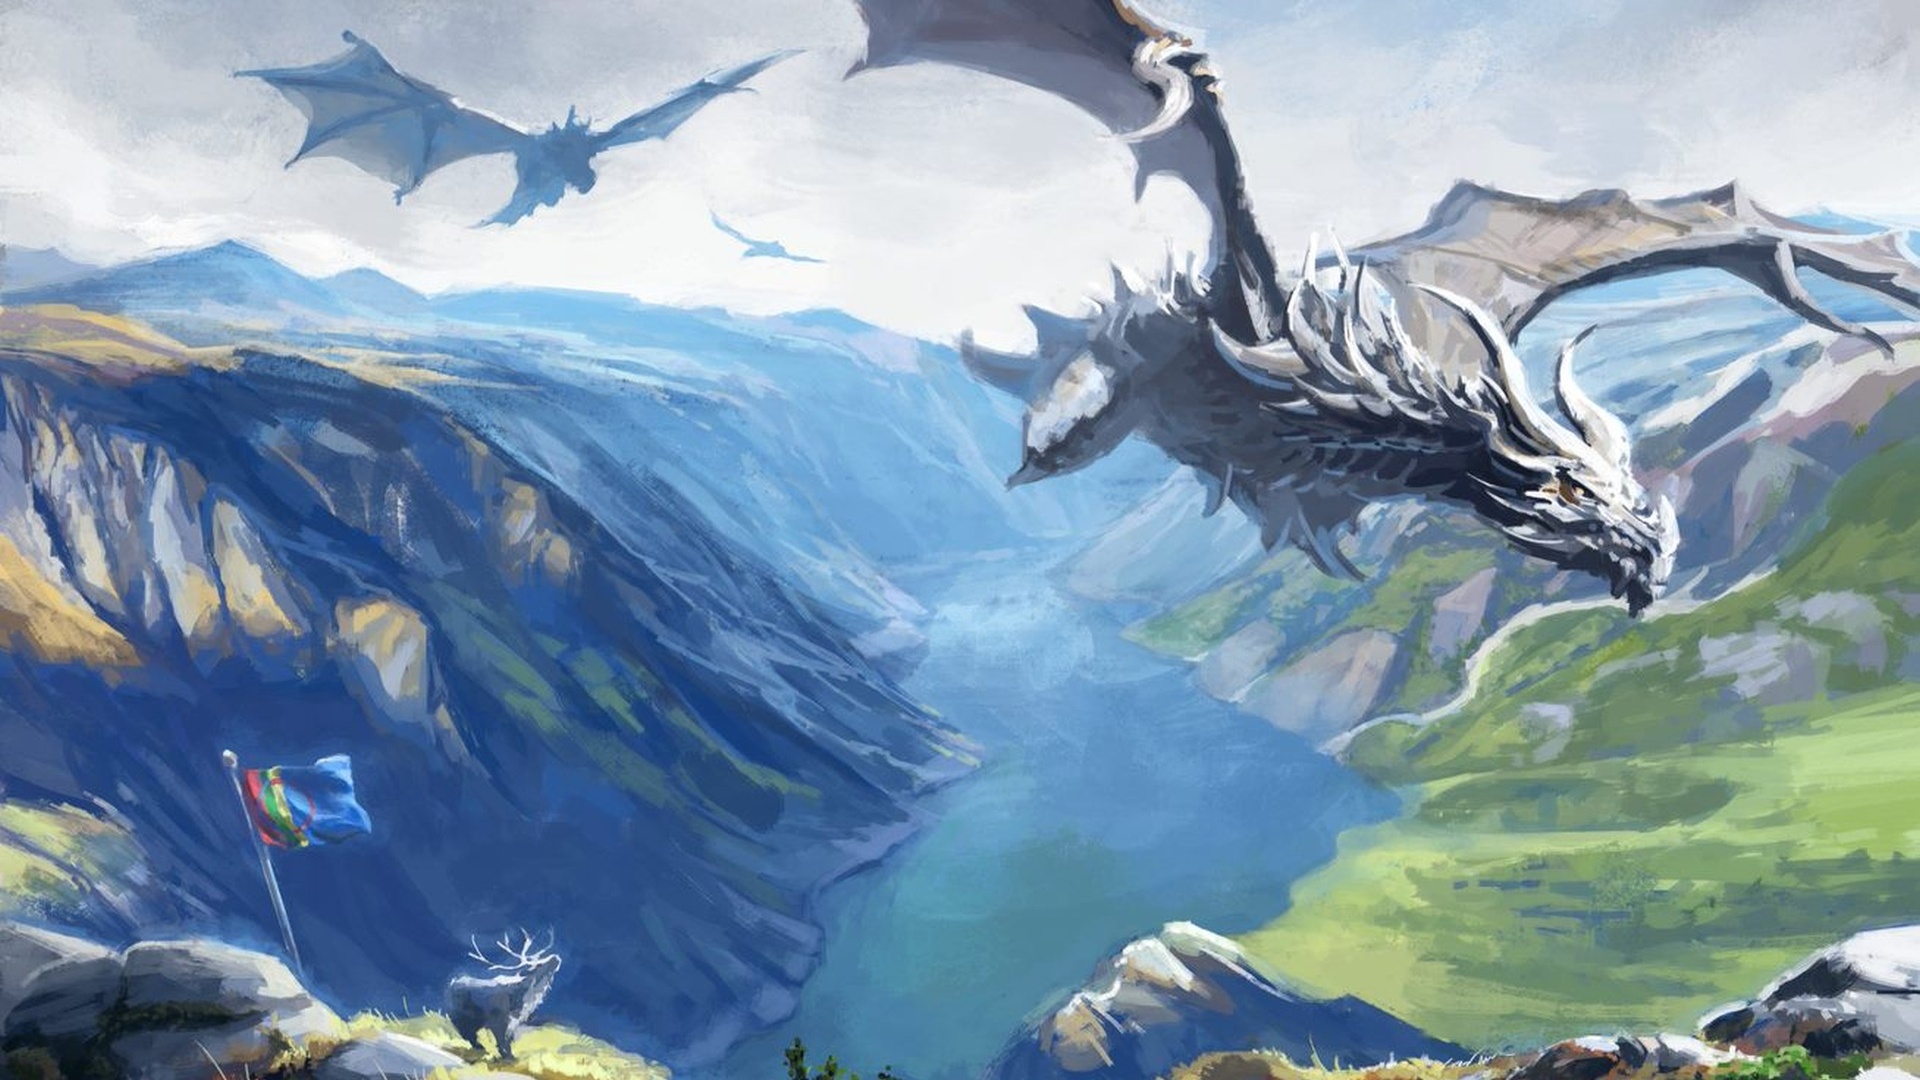 An image of a Skyrim dragons soaring over a ravine while an elk stands by next to the Sami flag